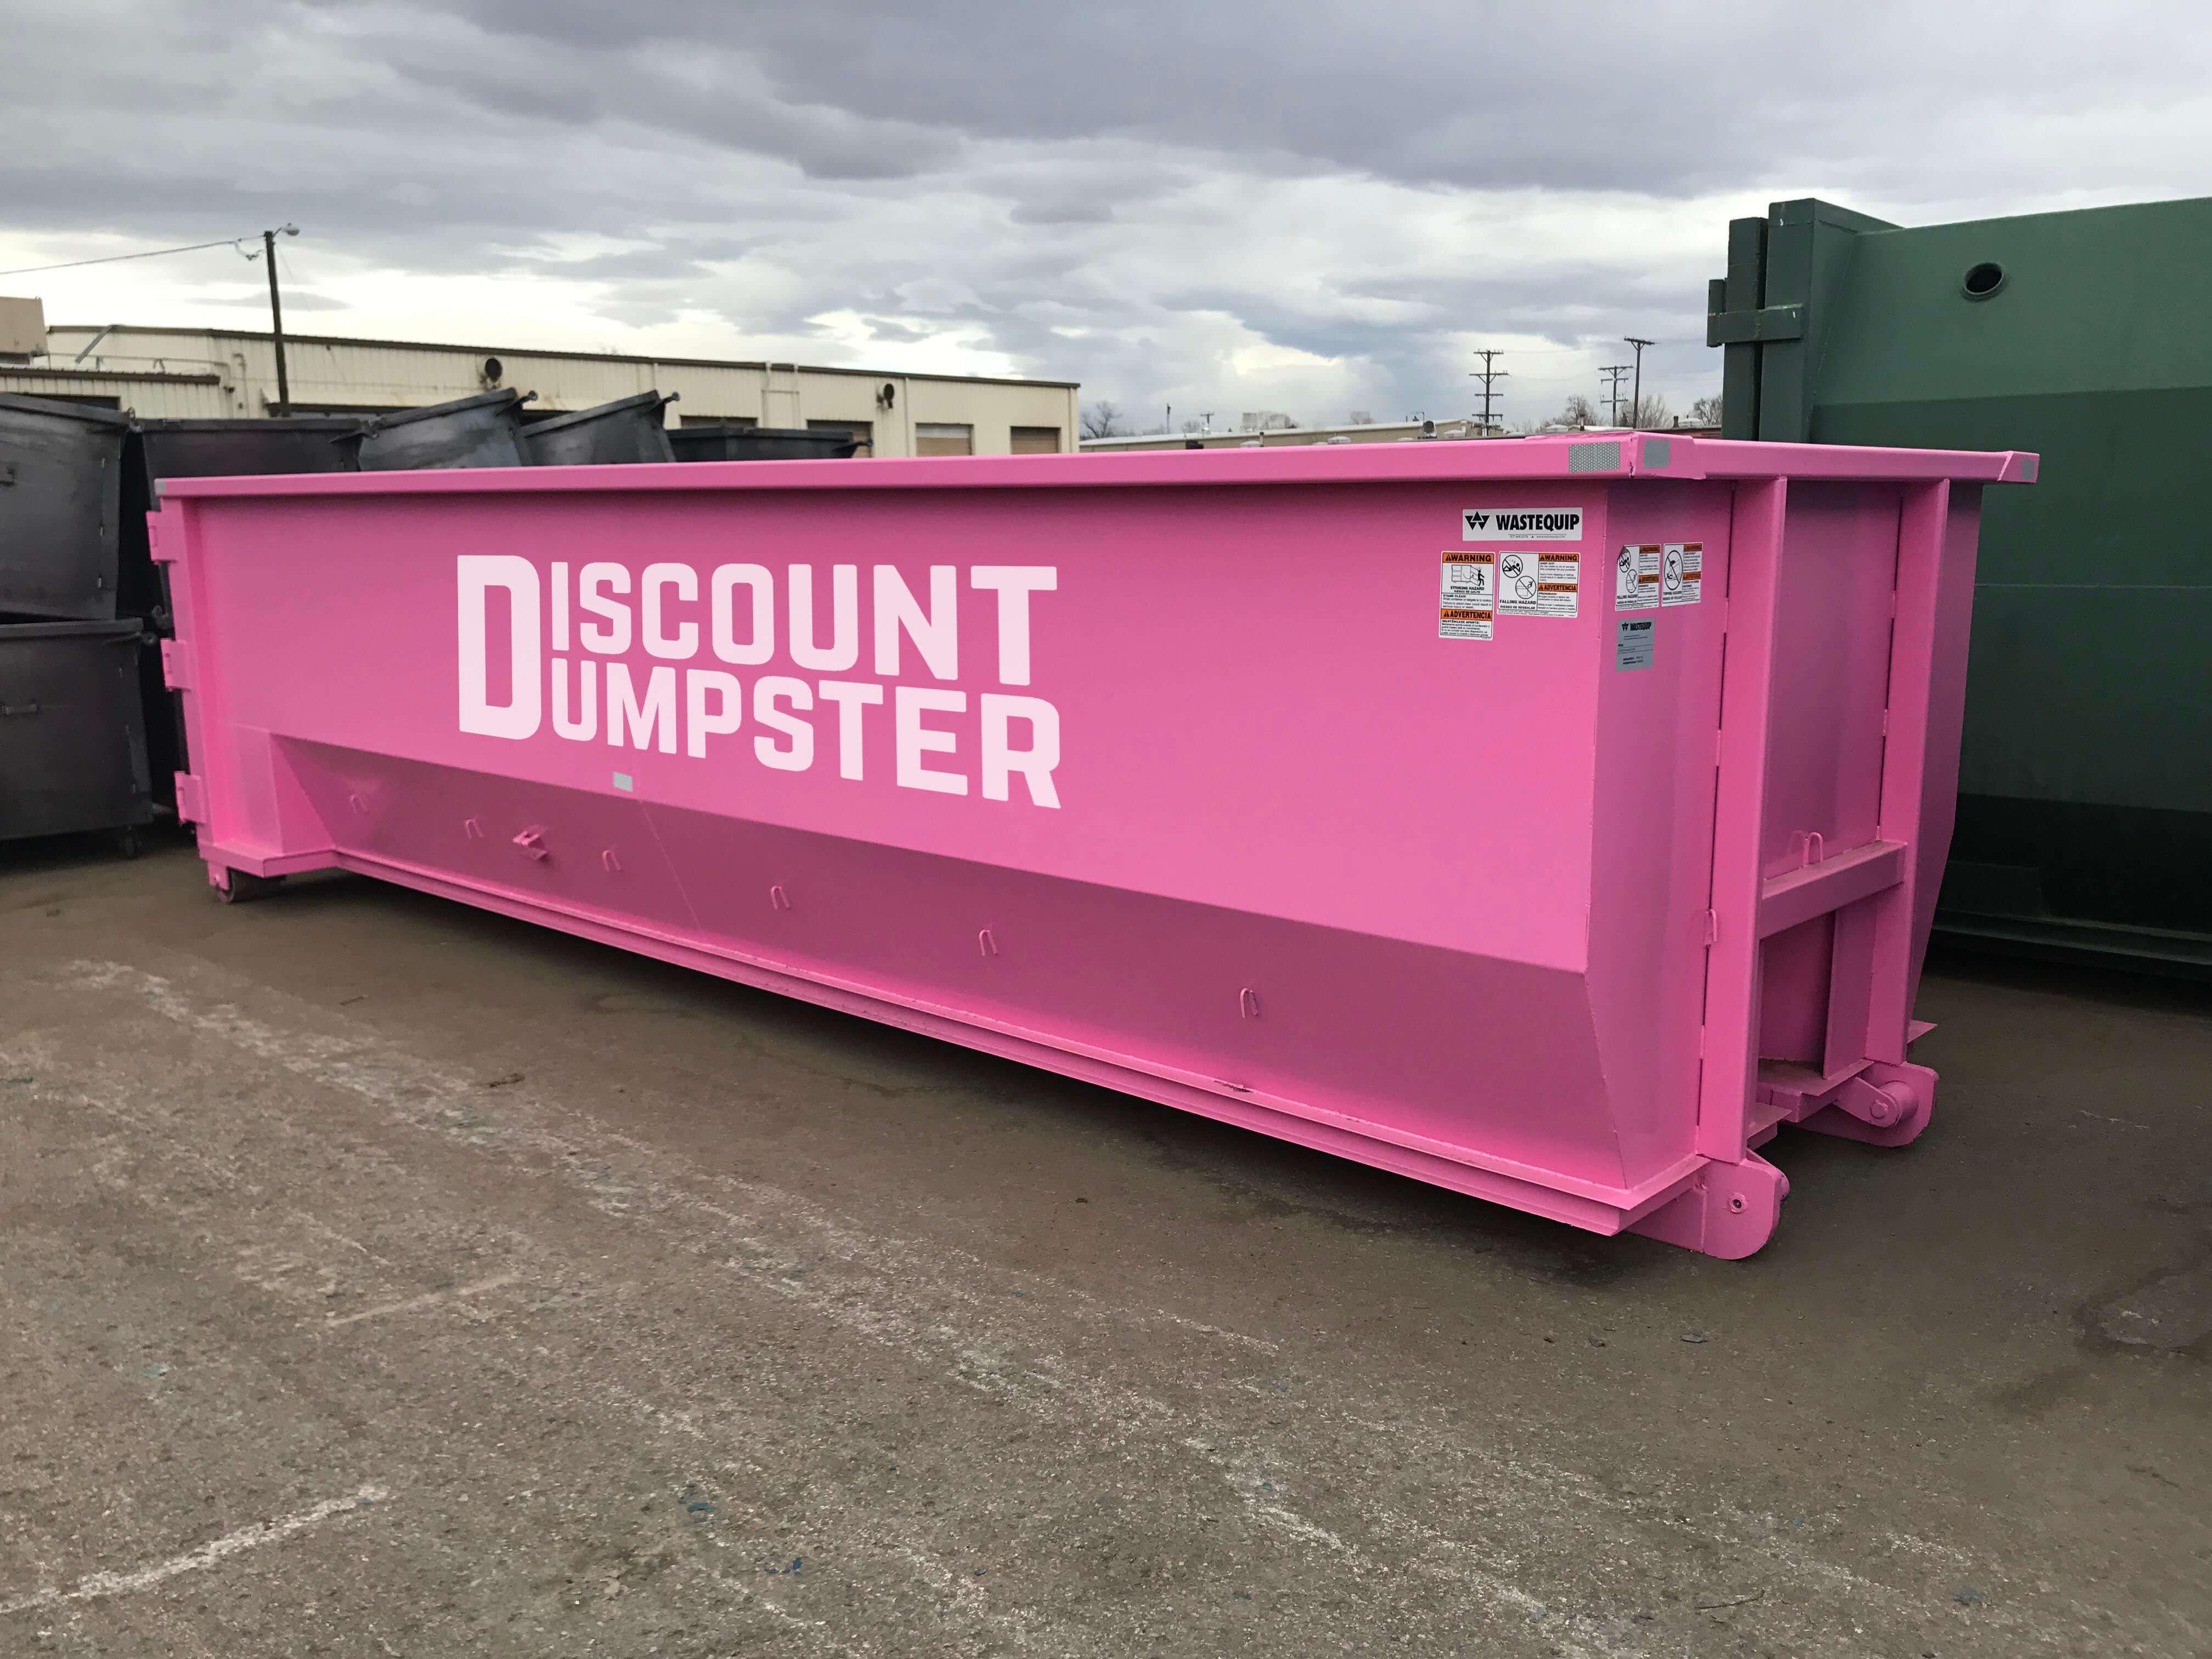 Discount dumpster has quality dumpsters and waste removal services in Chicago il Discount Dumpster Chicago (312)549-9198